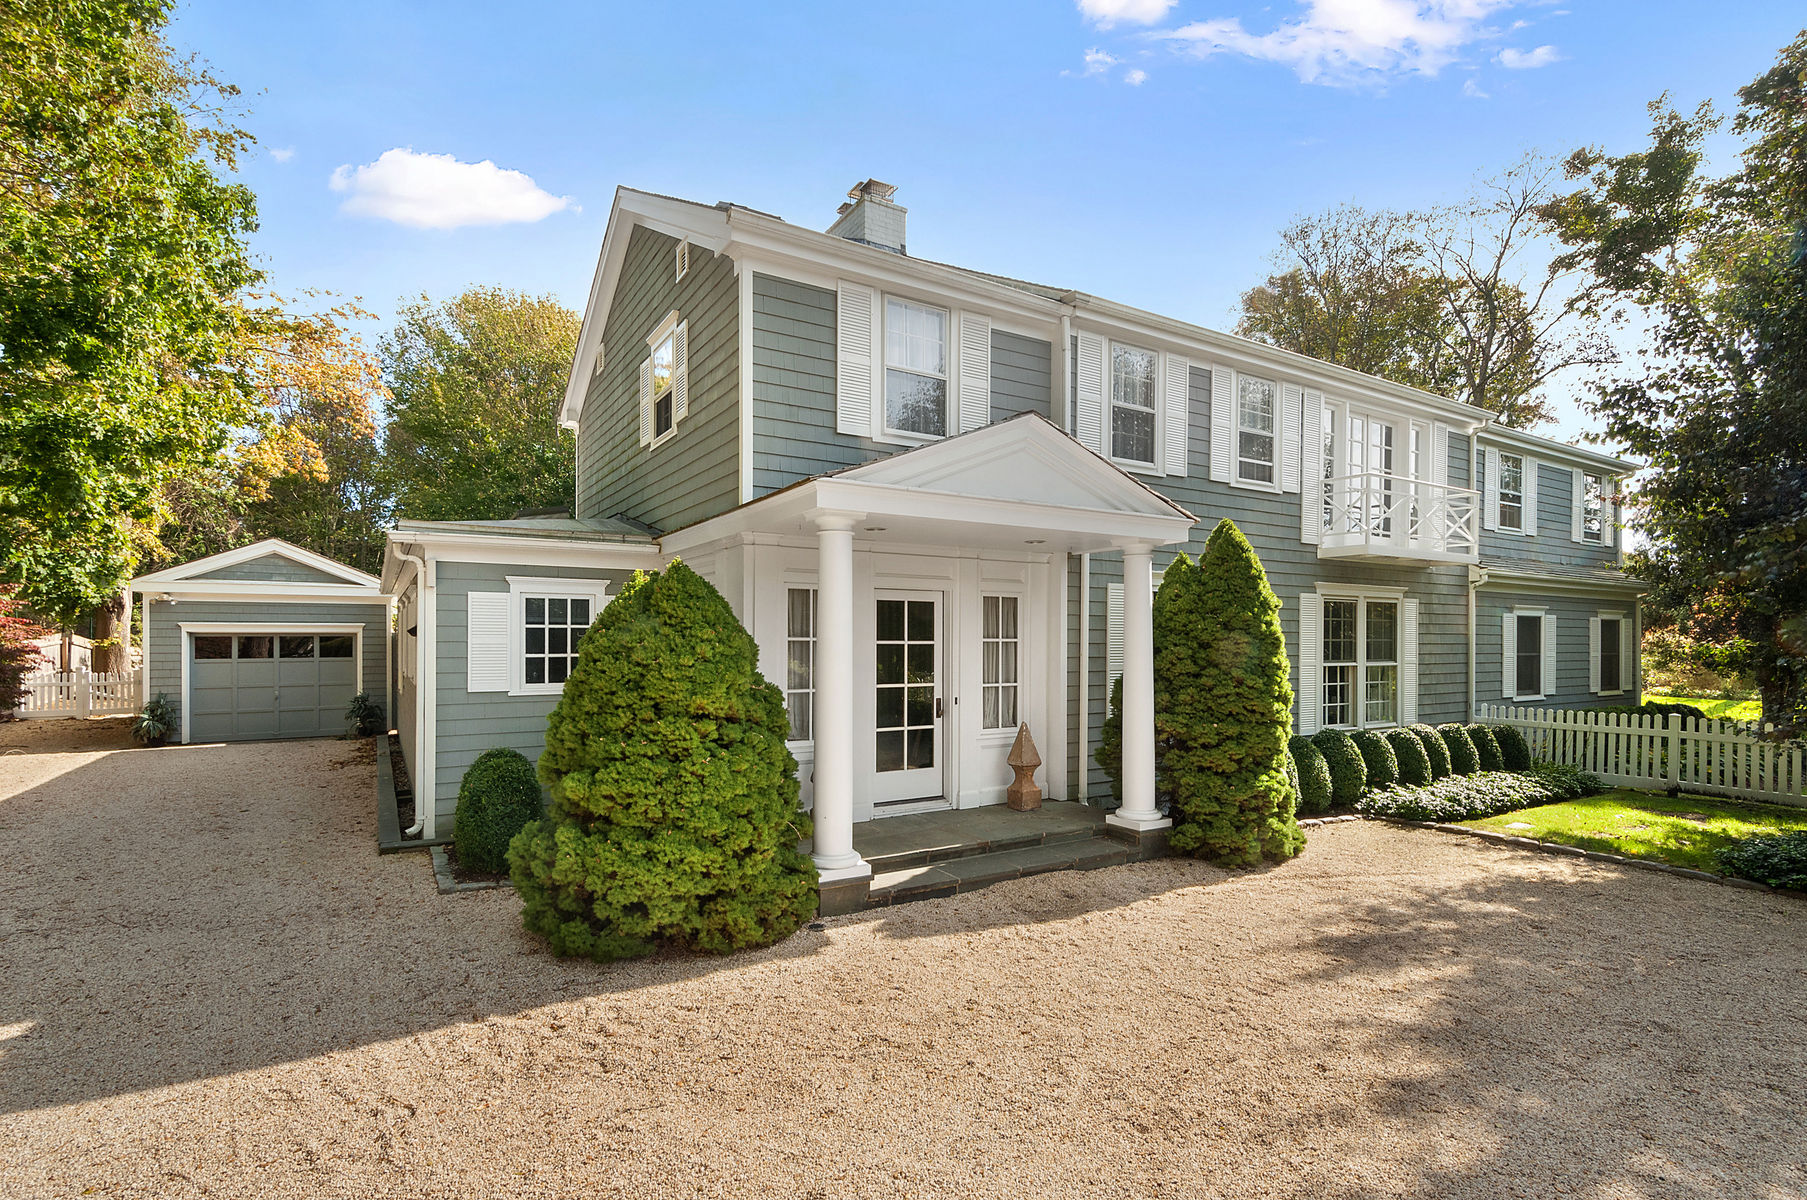 First Neck Lane, Village Of Southampton, Hamptons, NY - 5 Bedrooms  
4.5 Bathrooms - 